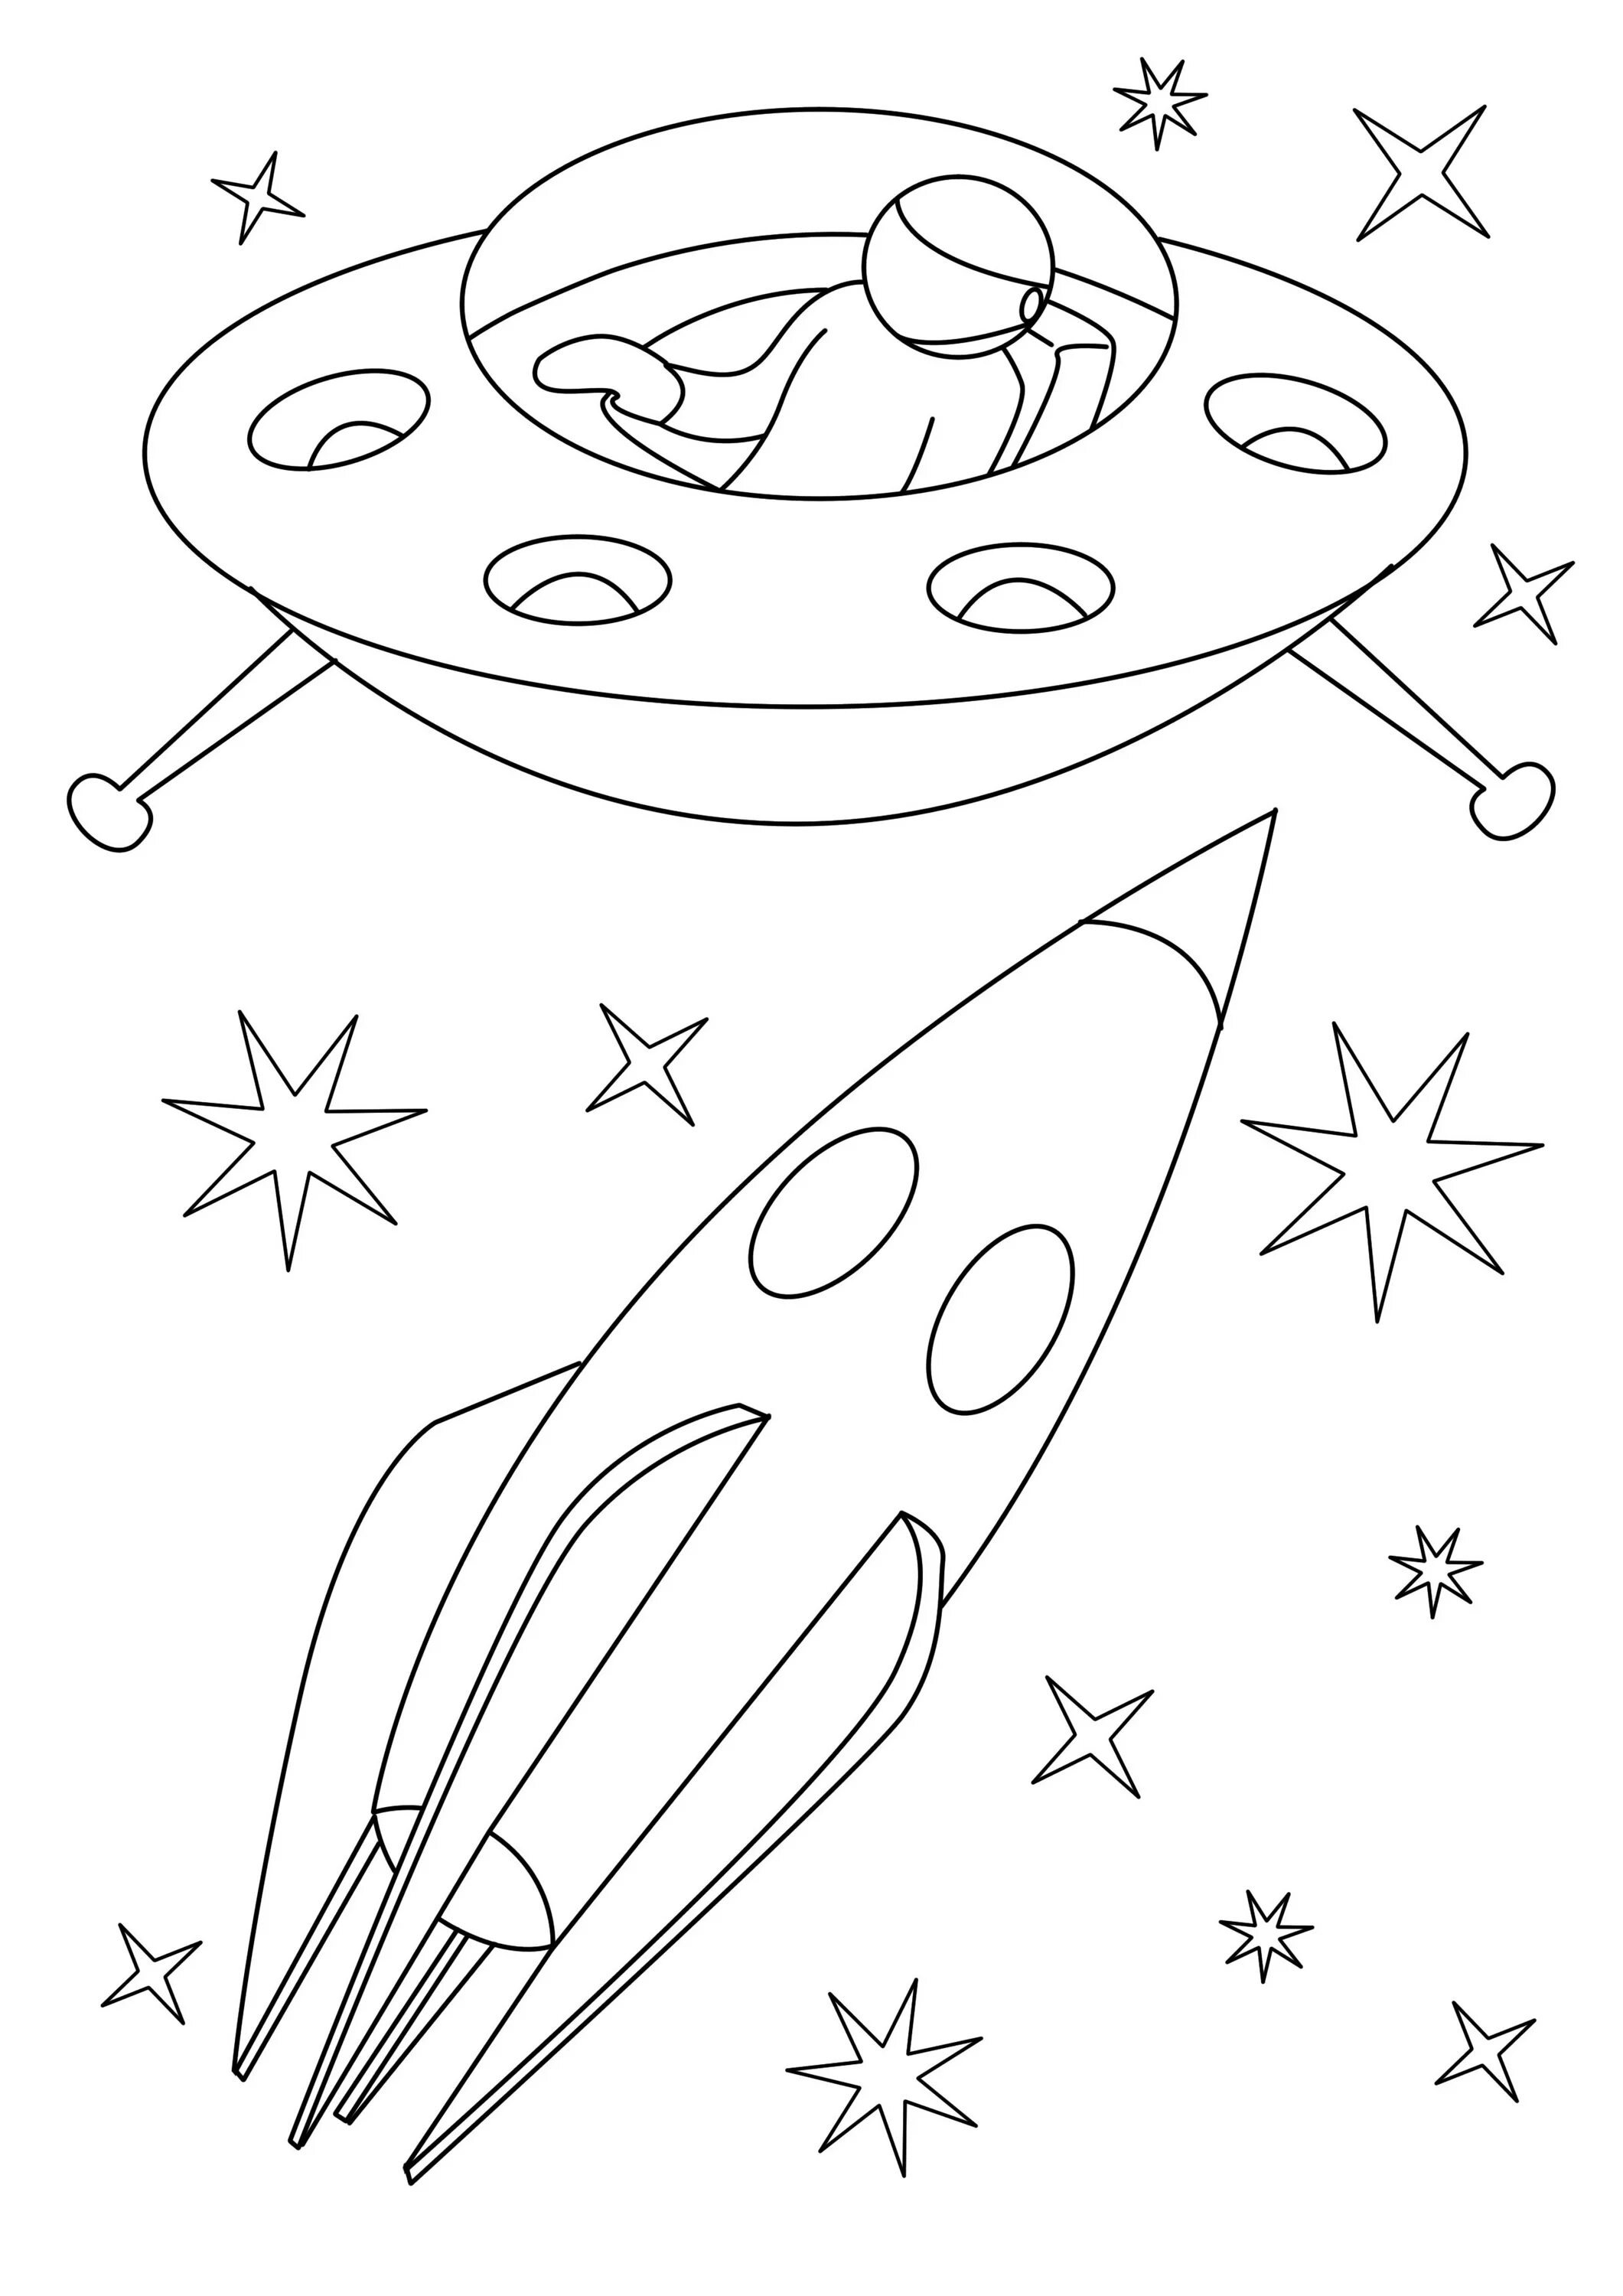 Incredible astronomy coloring book for 4-5 year olds